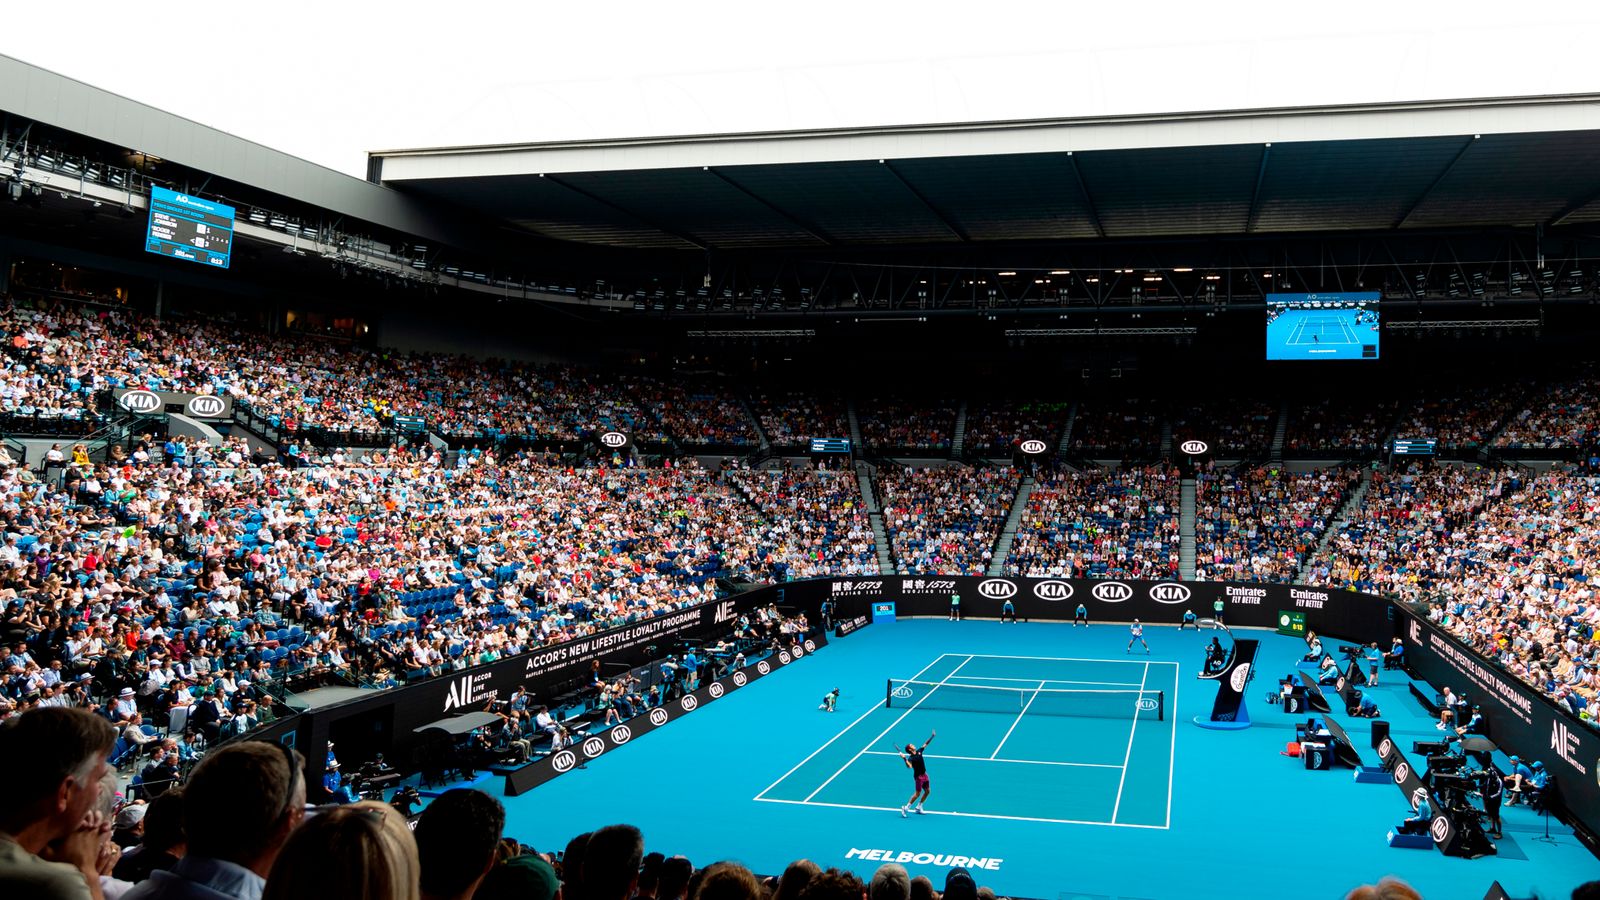 Australian Open to allow up to 30,000 fans a day at Melbourne Park